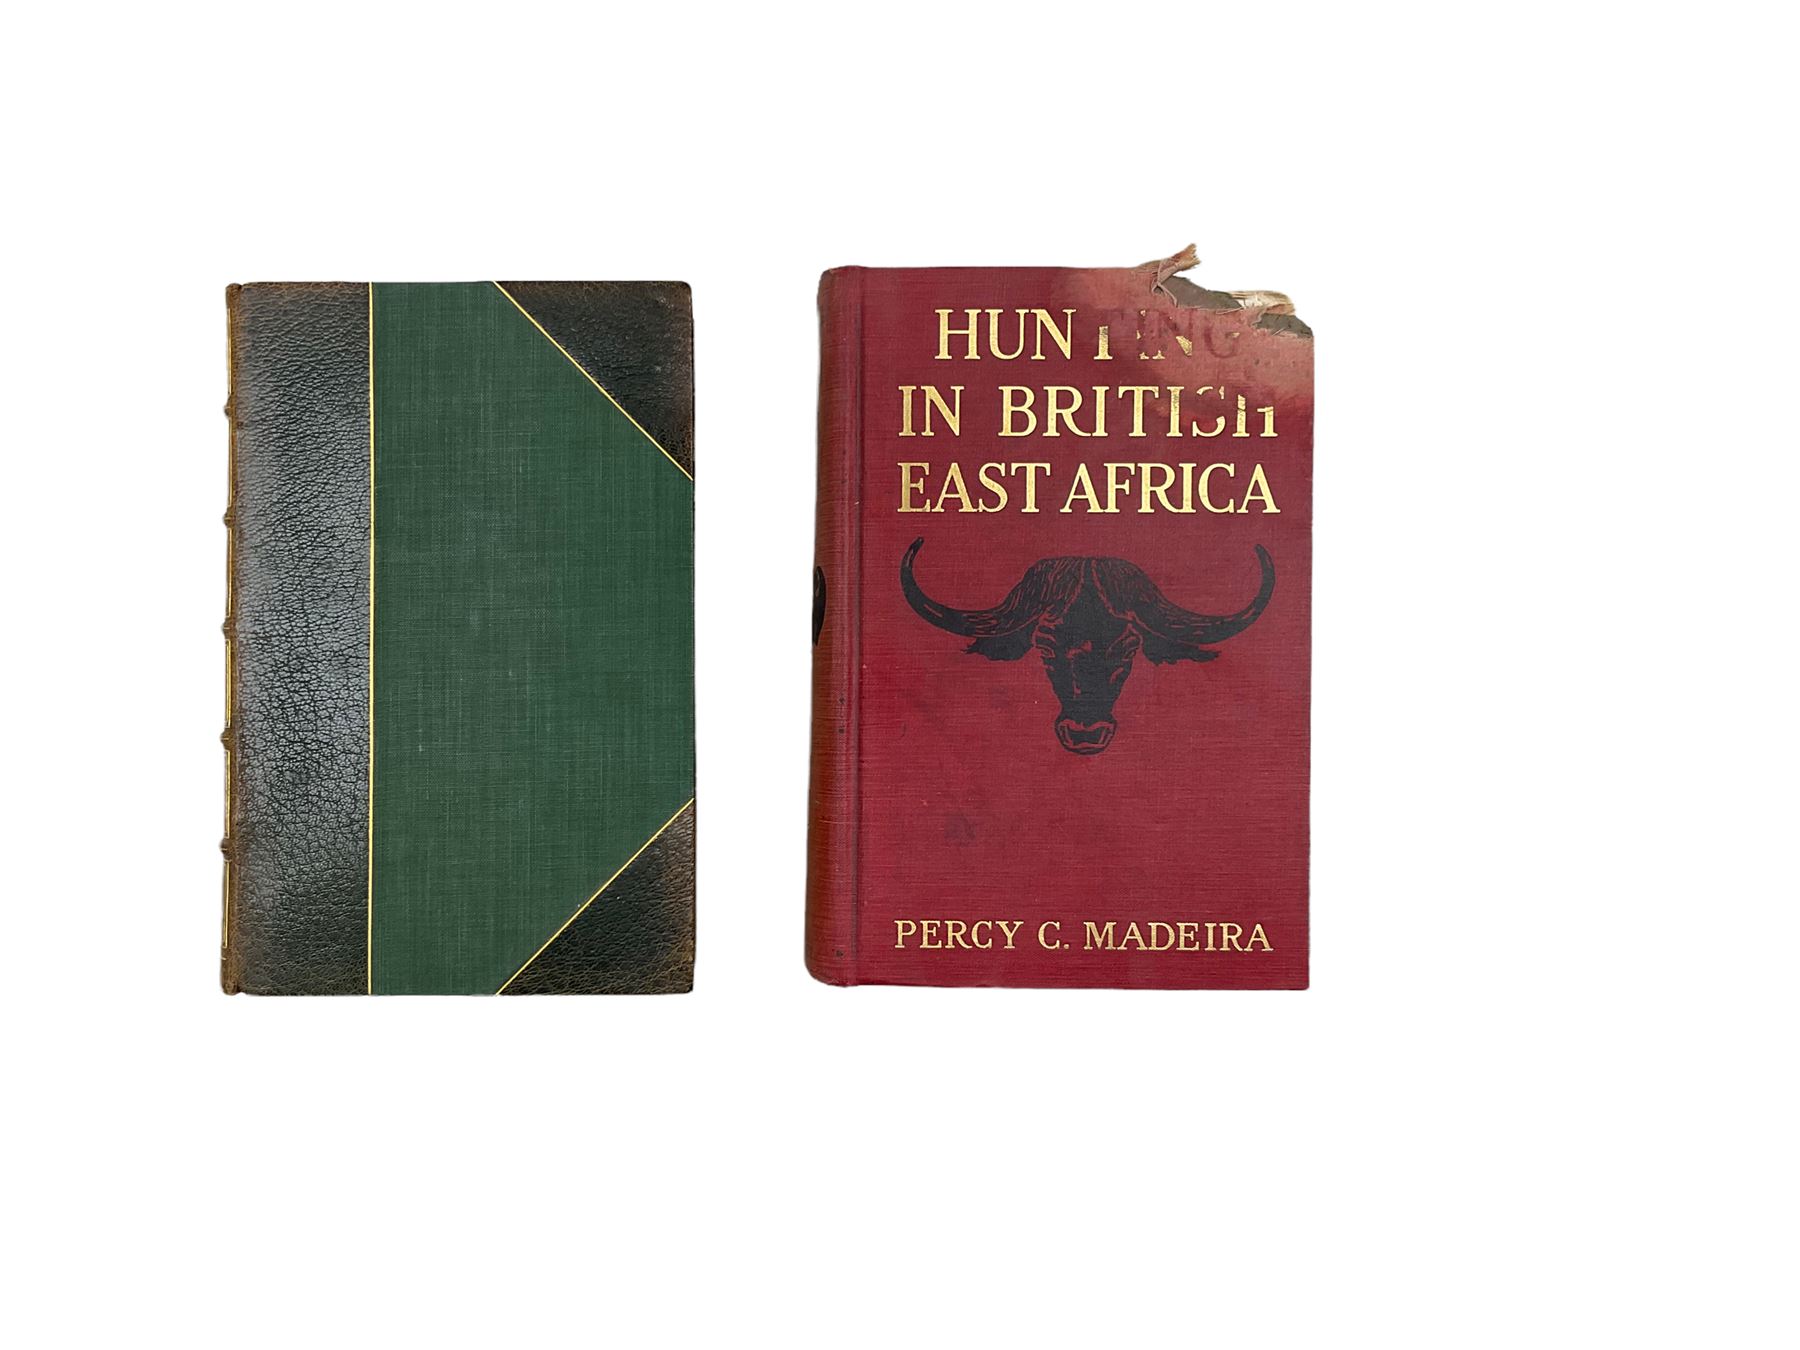 Abel Chapman - 'On Safari Big Game Hunting in East Africa'published Edward Arnold 1908